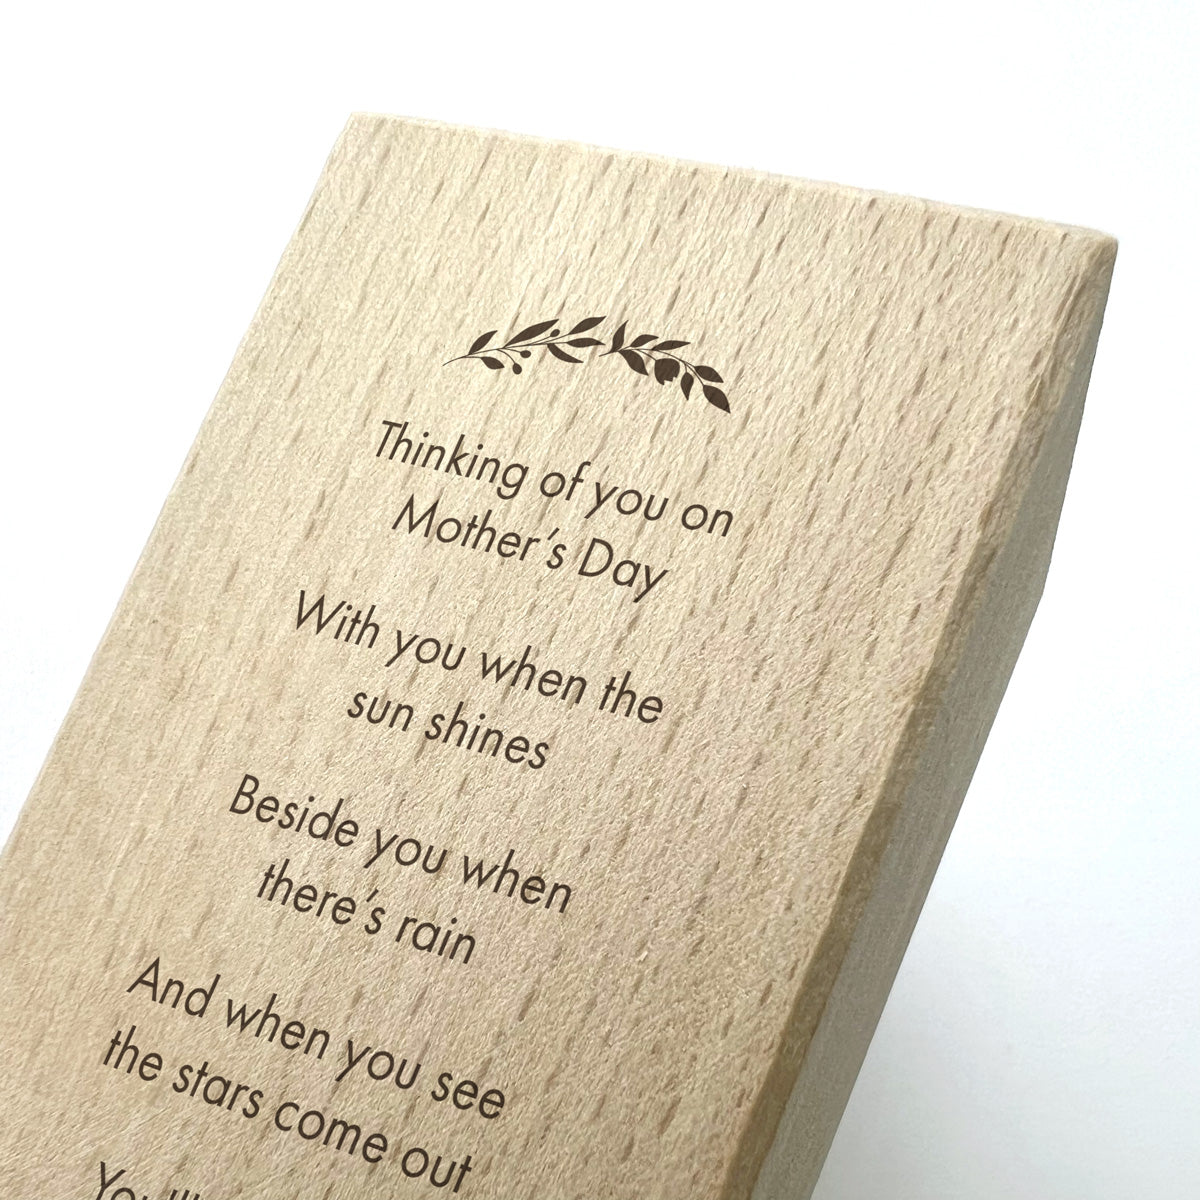 Thinking Of You On Mother's Day Wooden Tea Light Holder